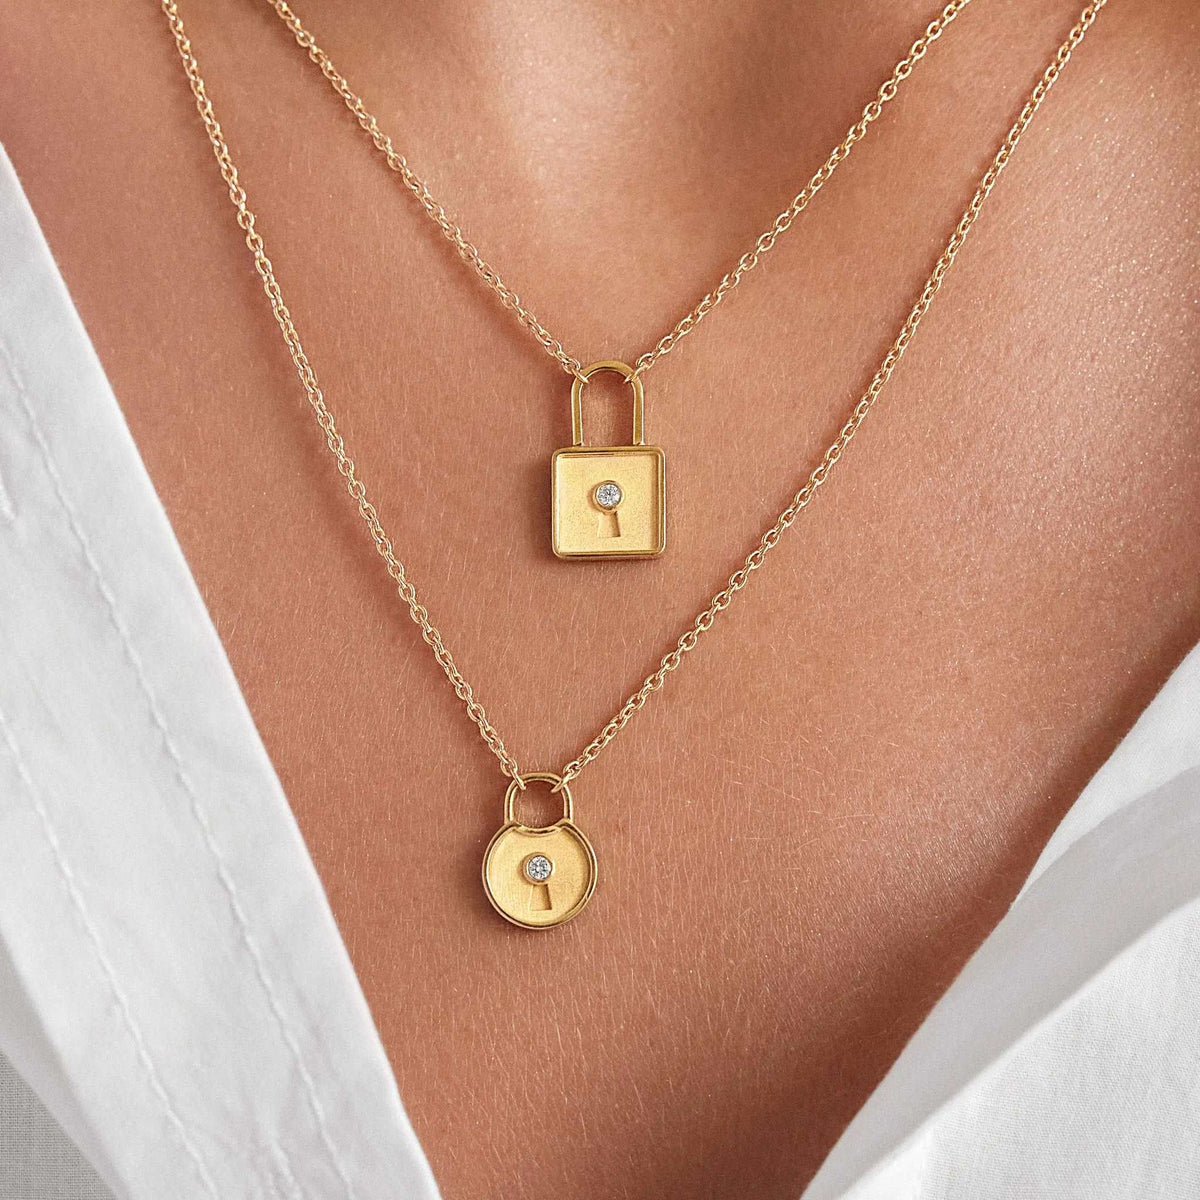 Buy Coco Chanel Gold Necklace Online In India -  India